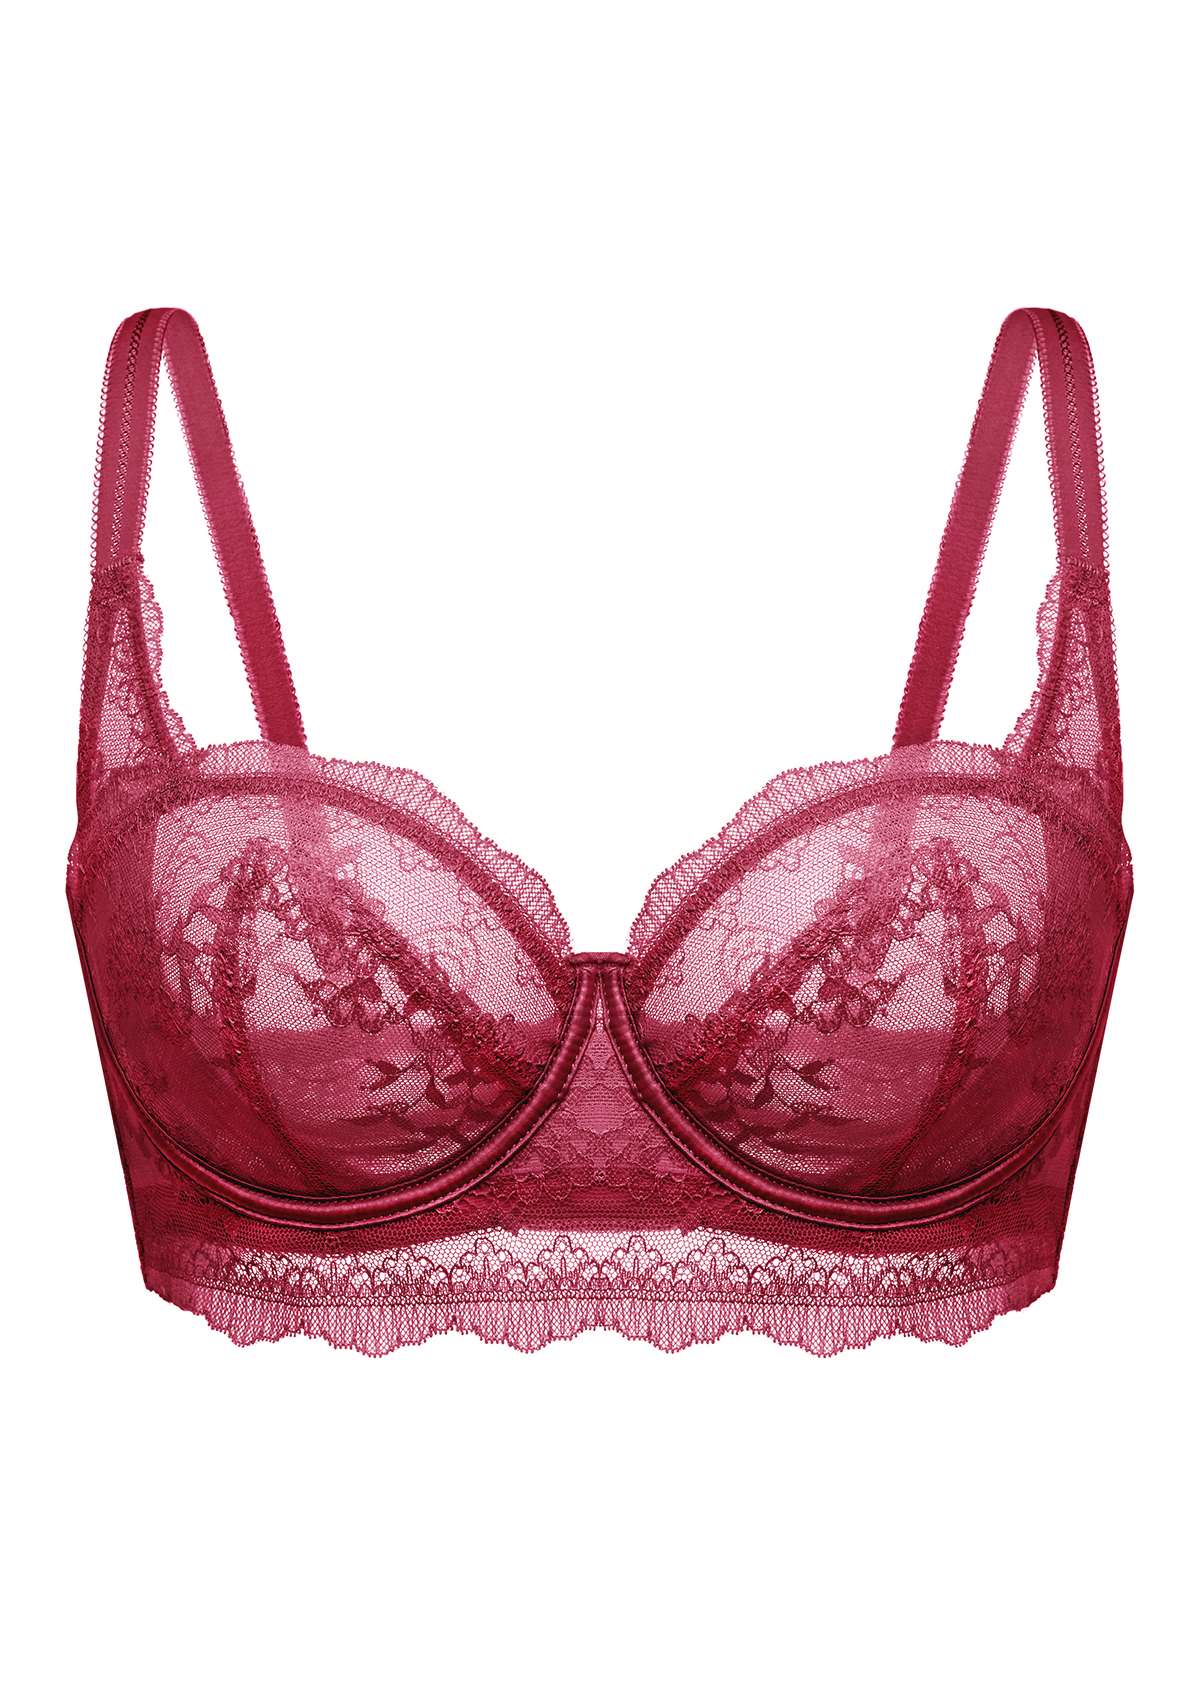 HSIA Floral Lace Unlined Bridal Balconette Bra Set - Supportive Classic - Burgundy / 42 / DD/E